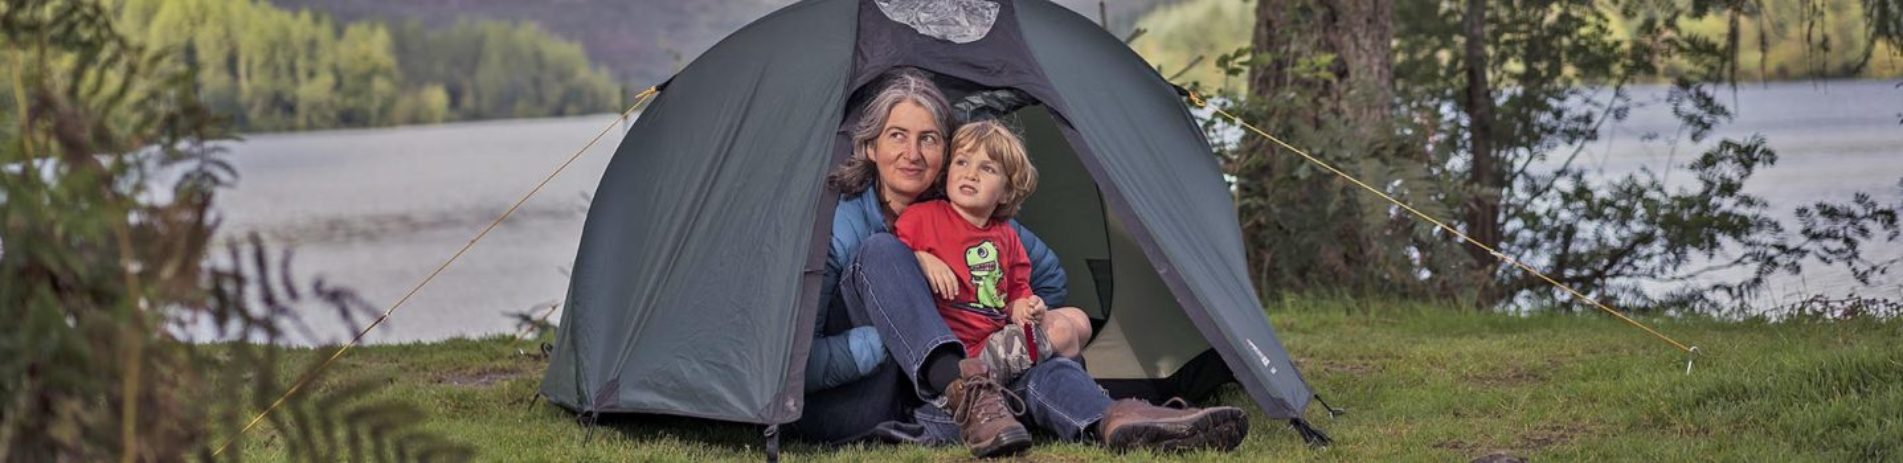 woman-holding-young-boy-at-entrance-of-dark-green-tent-in-the-forest-with-loch-water-visible-behind